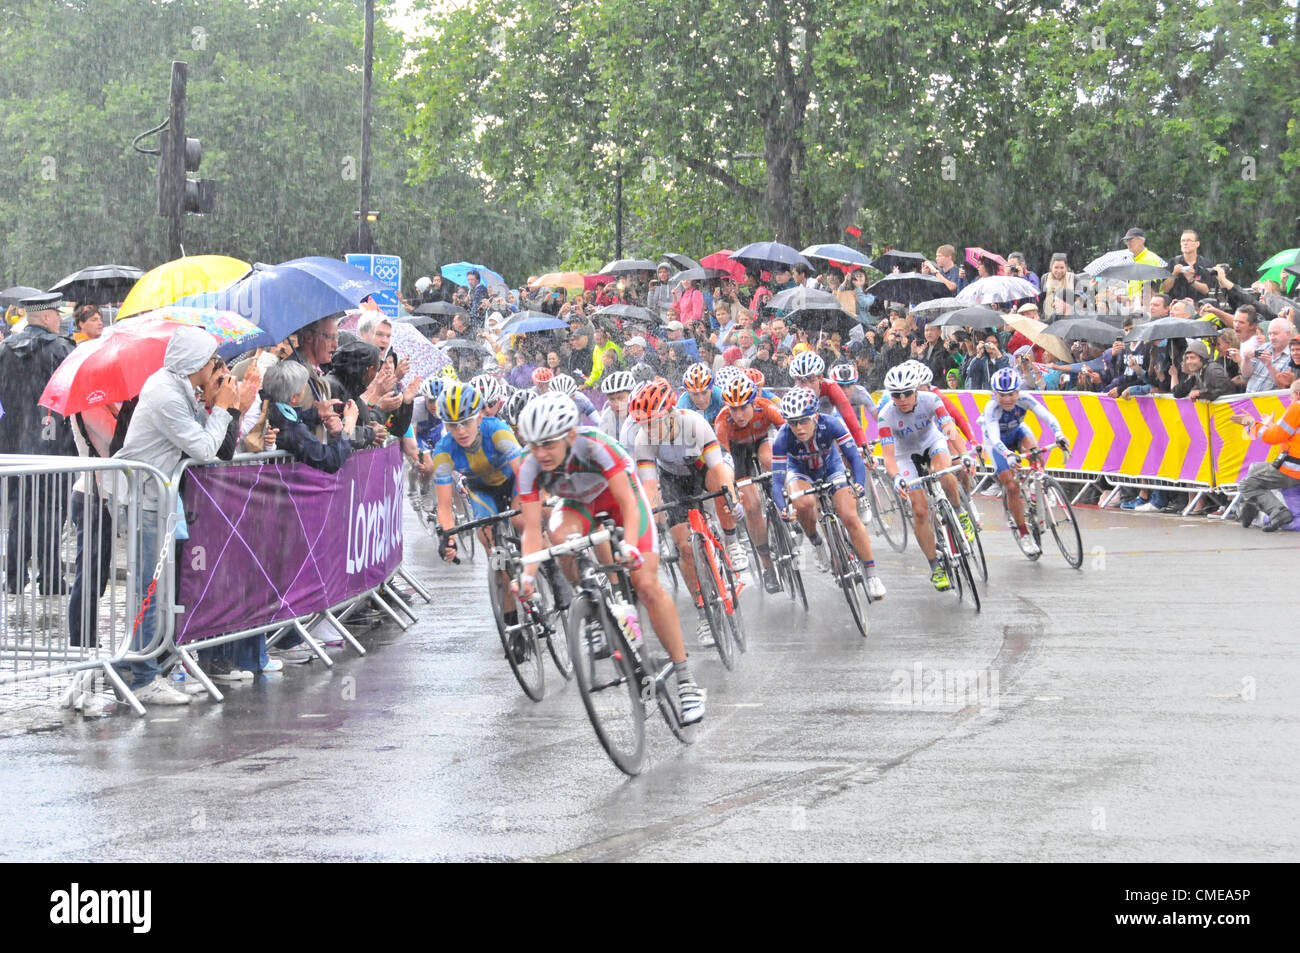 Hyde Park Corner, London, UK. 29th July 2012. The pack follows the leaders in the women's cycling road race at Hyde Park Corner approaches the end as the riders and crowd endure heavy rain and a thunderstorm. Stock Photo